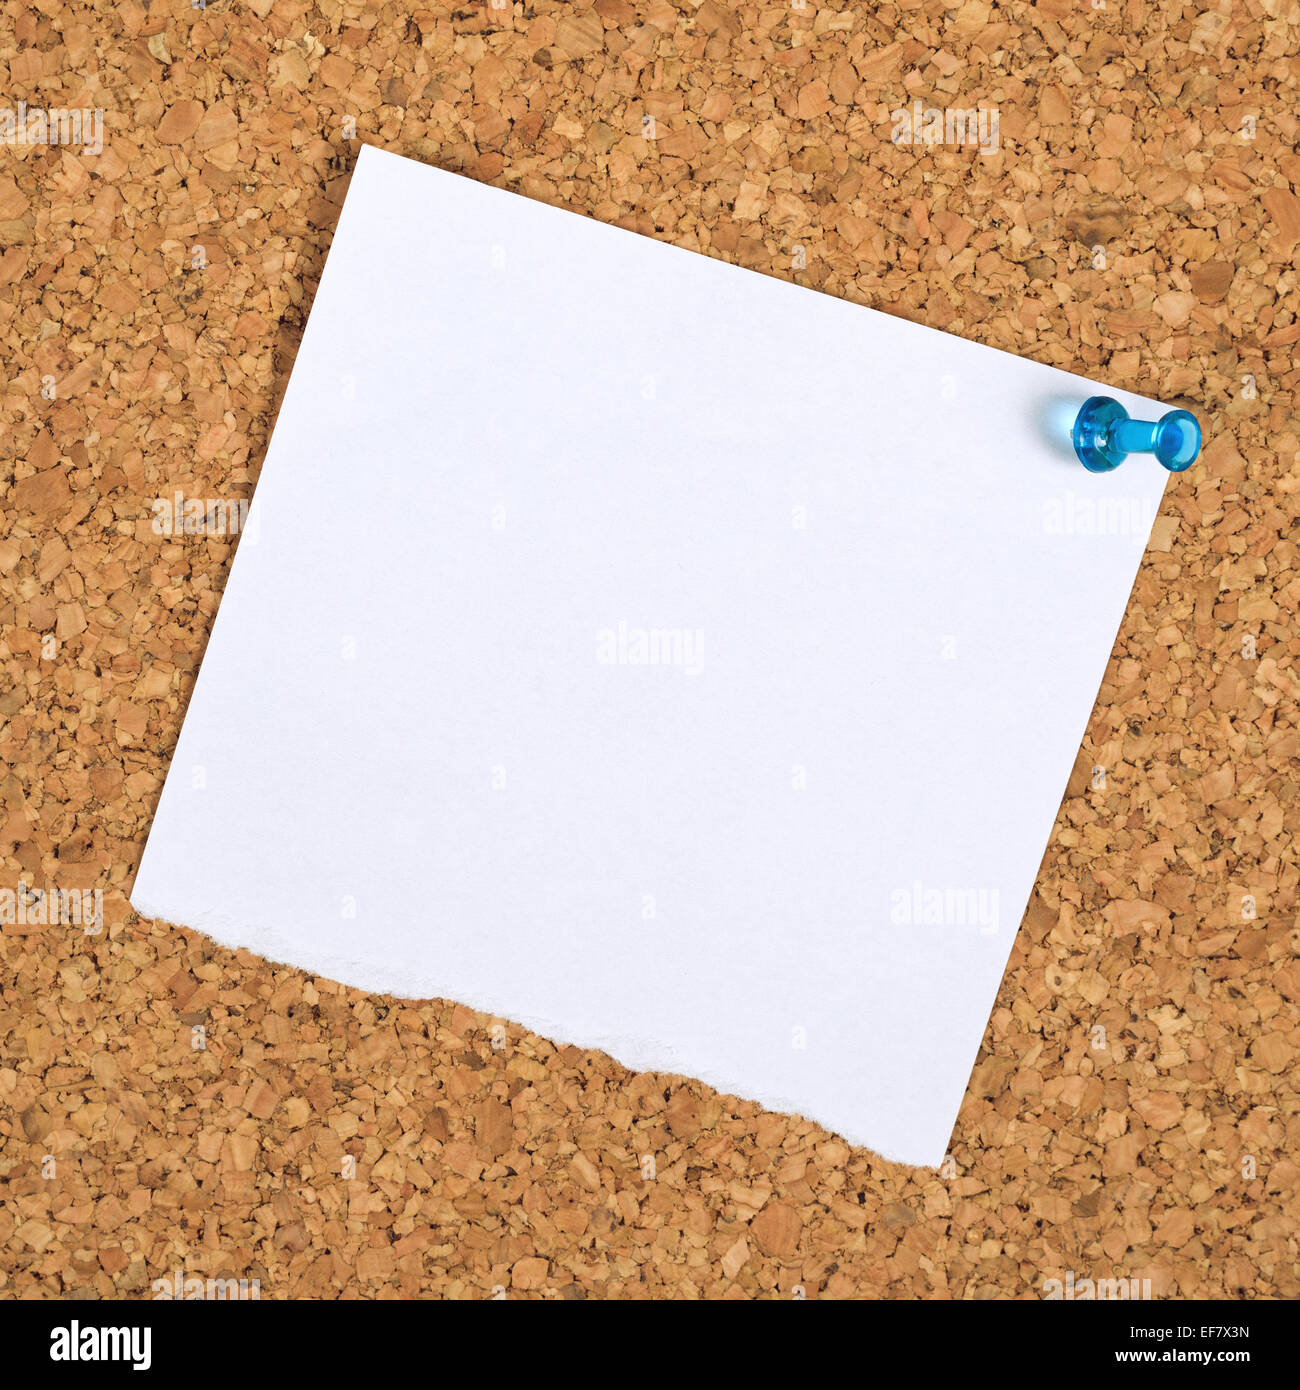 Blank Paper Reminder Note Pinned to a Cork Memory Bulletin Board as Copy Space for Your Message Stock Photo